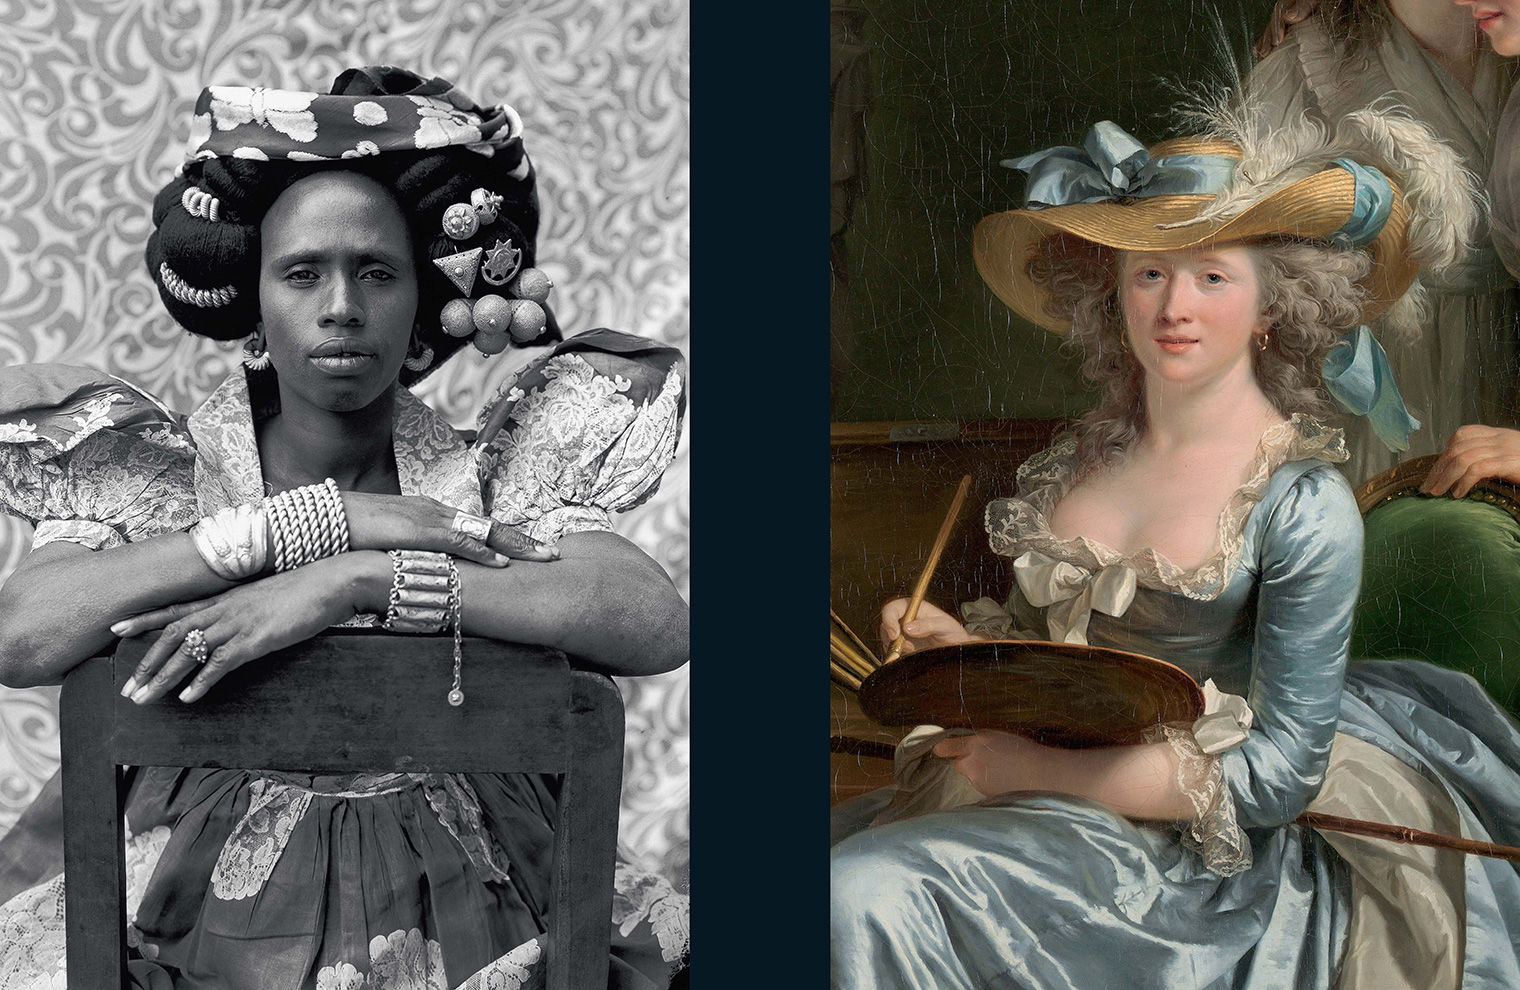 At left, a photograph of a woman seated backwards across a chair, her arms draped over the chair's back. She wears a lot of jewelry, a voluminous dress, and an elaborate updo. At right, a painting of a woman artist at work. She holds a painting palette, and wears a blue dress and hat accented with ribbons and feathers.